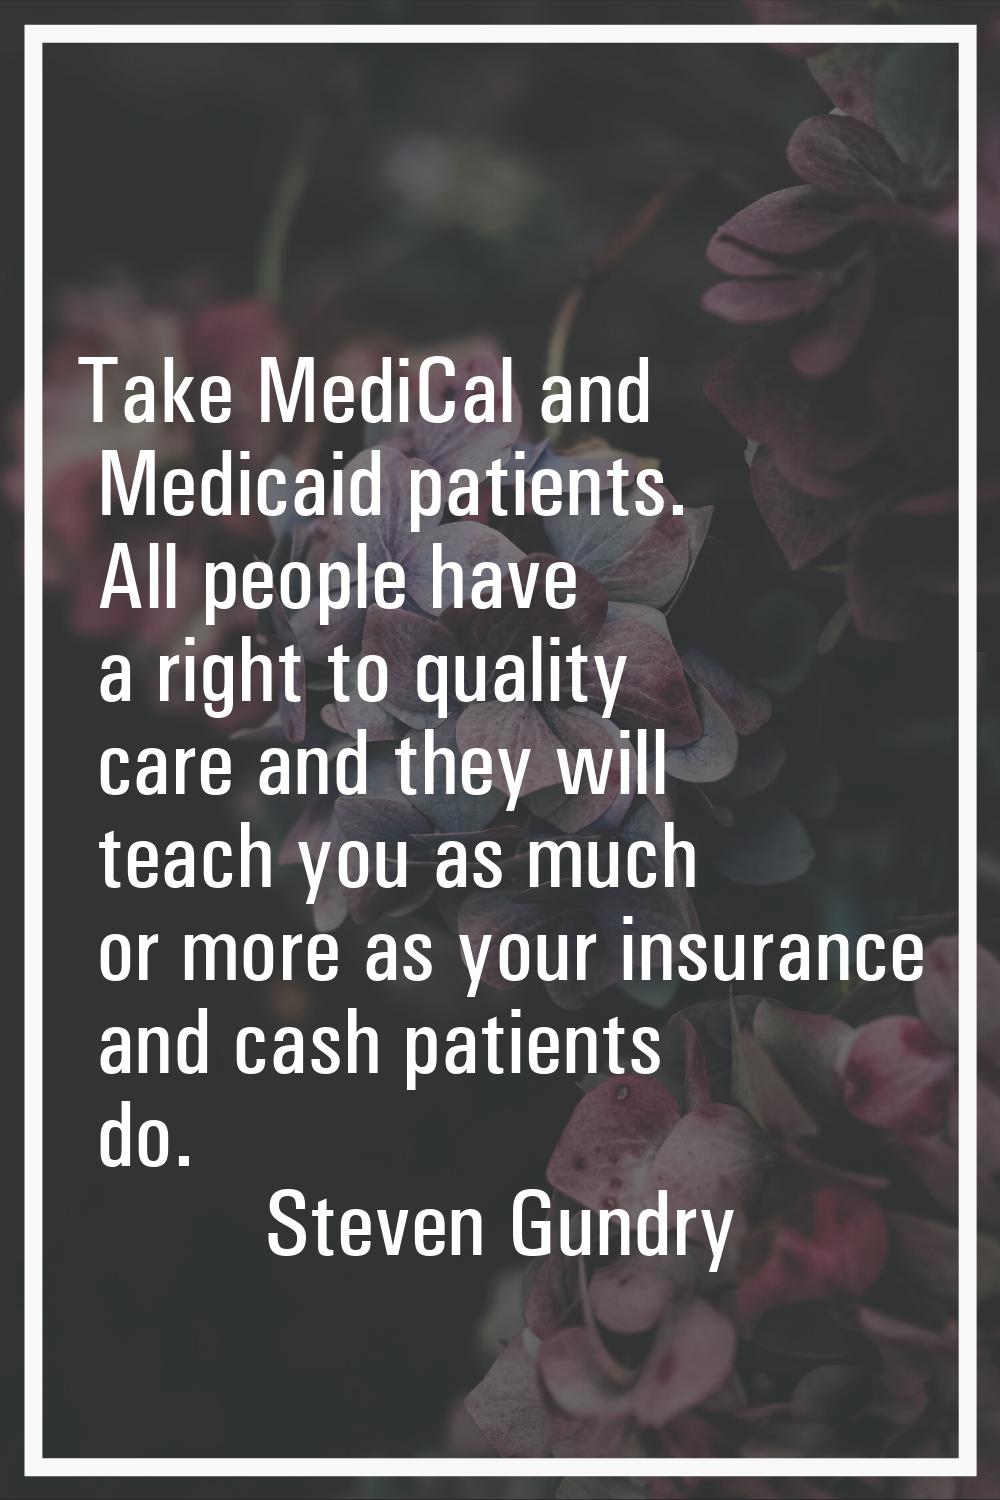 Take MediCal and Medicaid patients. All people have a right to quality care and they will teach you